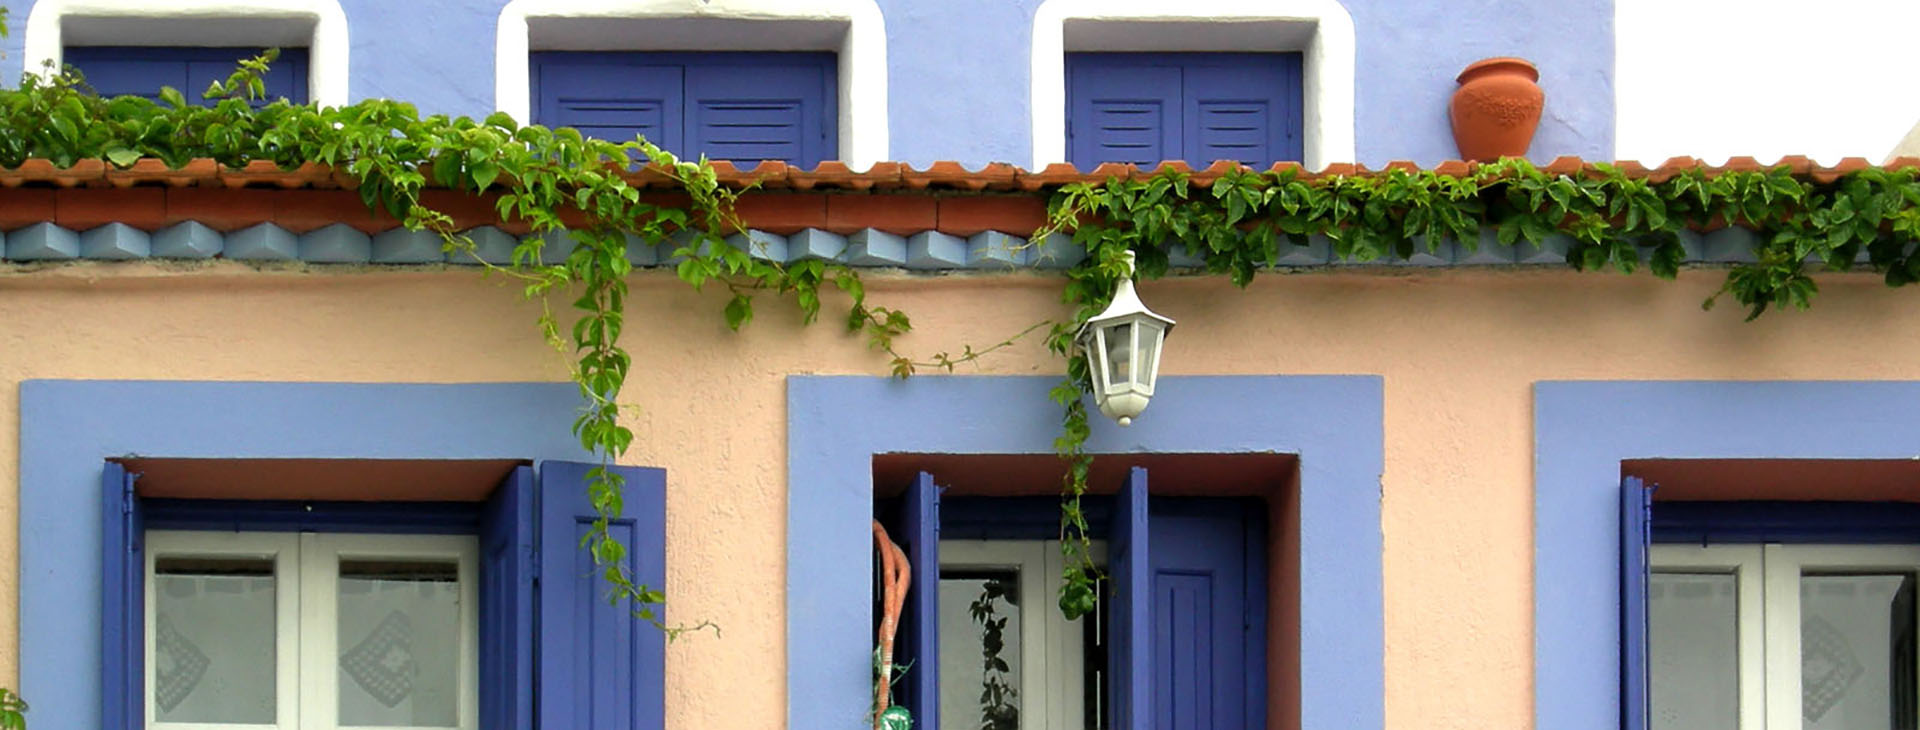 Traditional style colored house of Alonissos